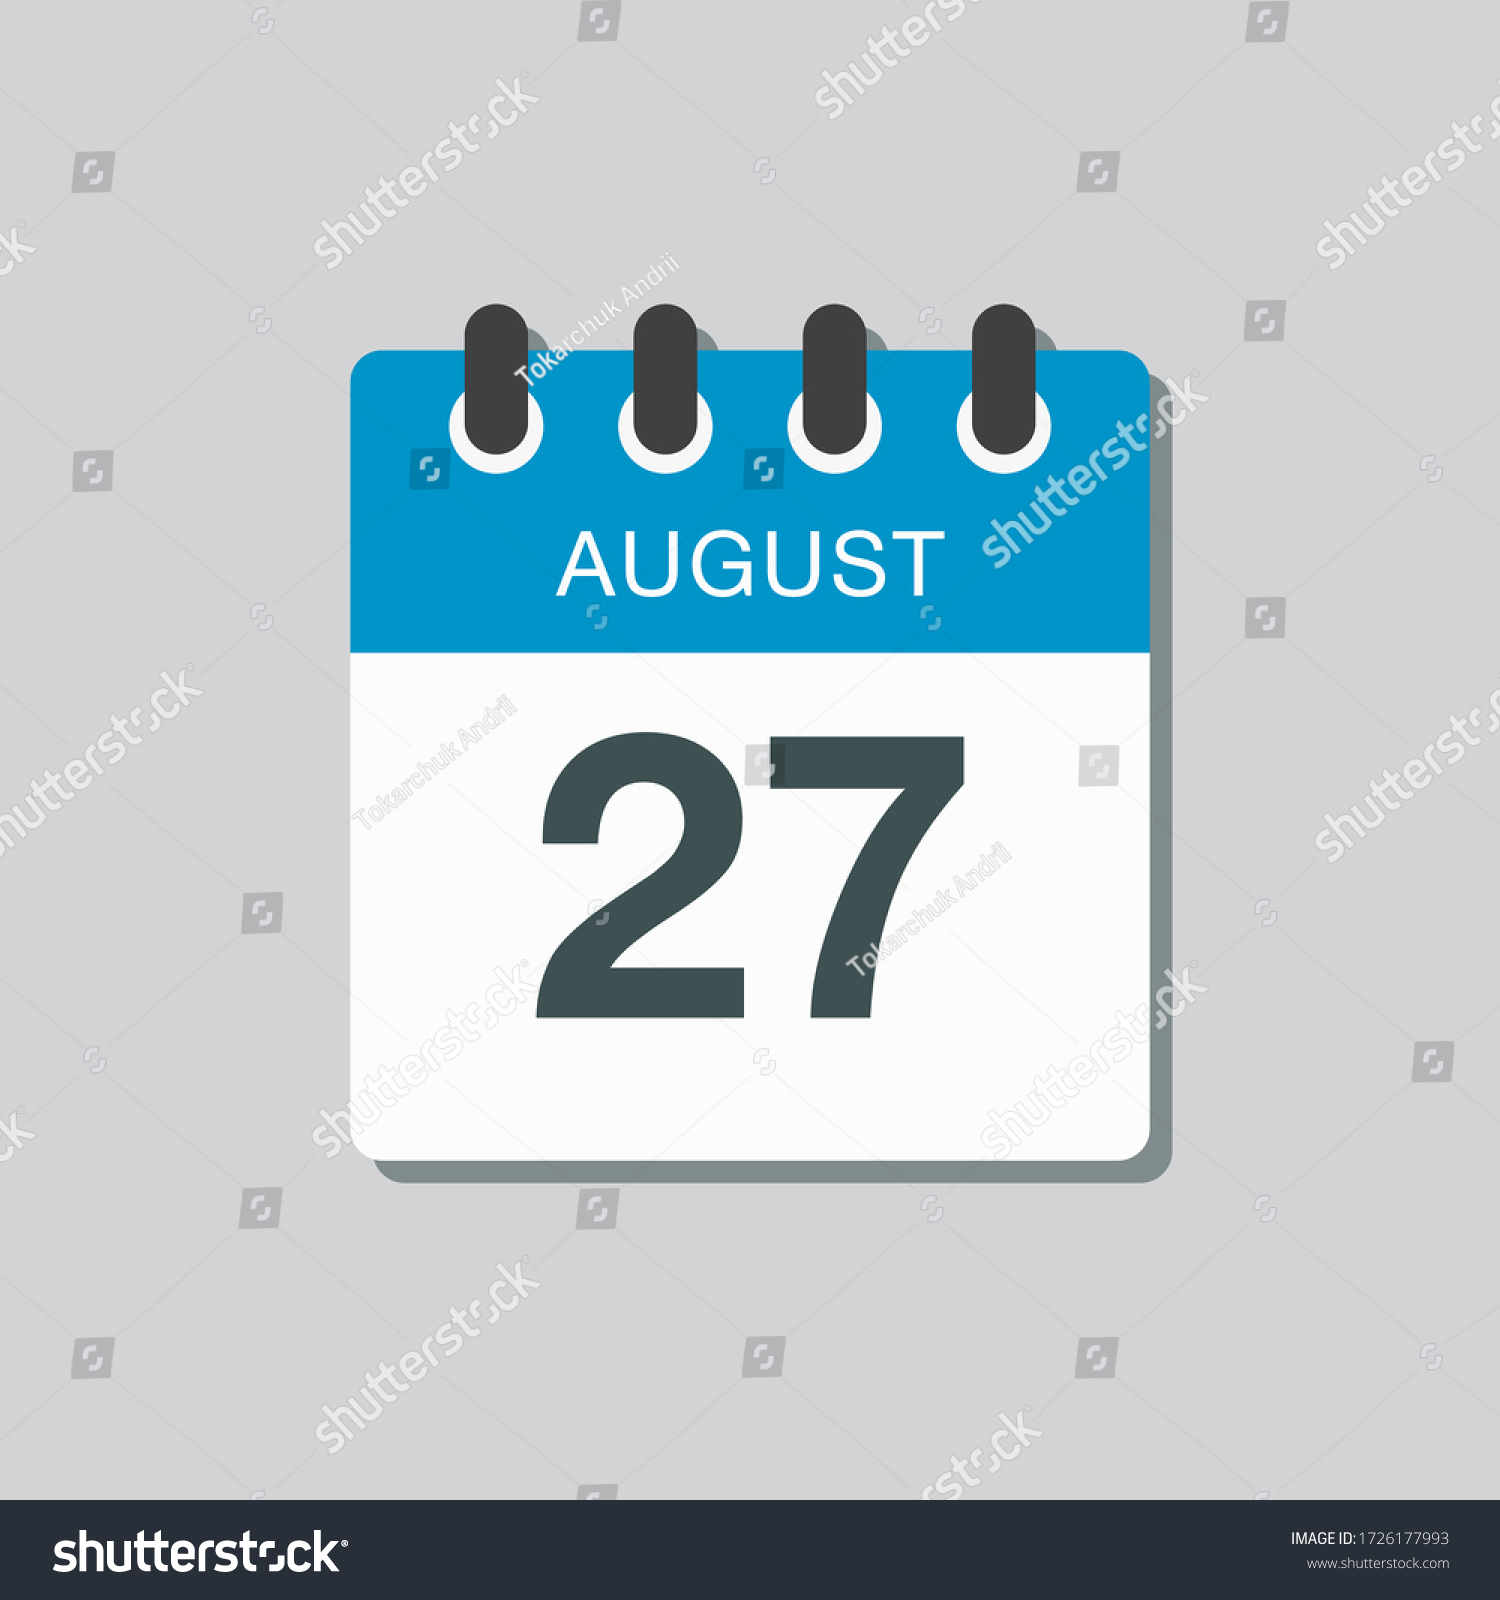 SVG of Vector icon calendar day - 27 August. Days of the year. Vector illustration flat style. Date day of month Sunday, Monday, Tuesday, Wednesday, Thursday, Friday, Saturday. Summer holidays spring August. svg